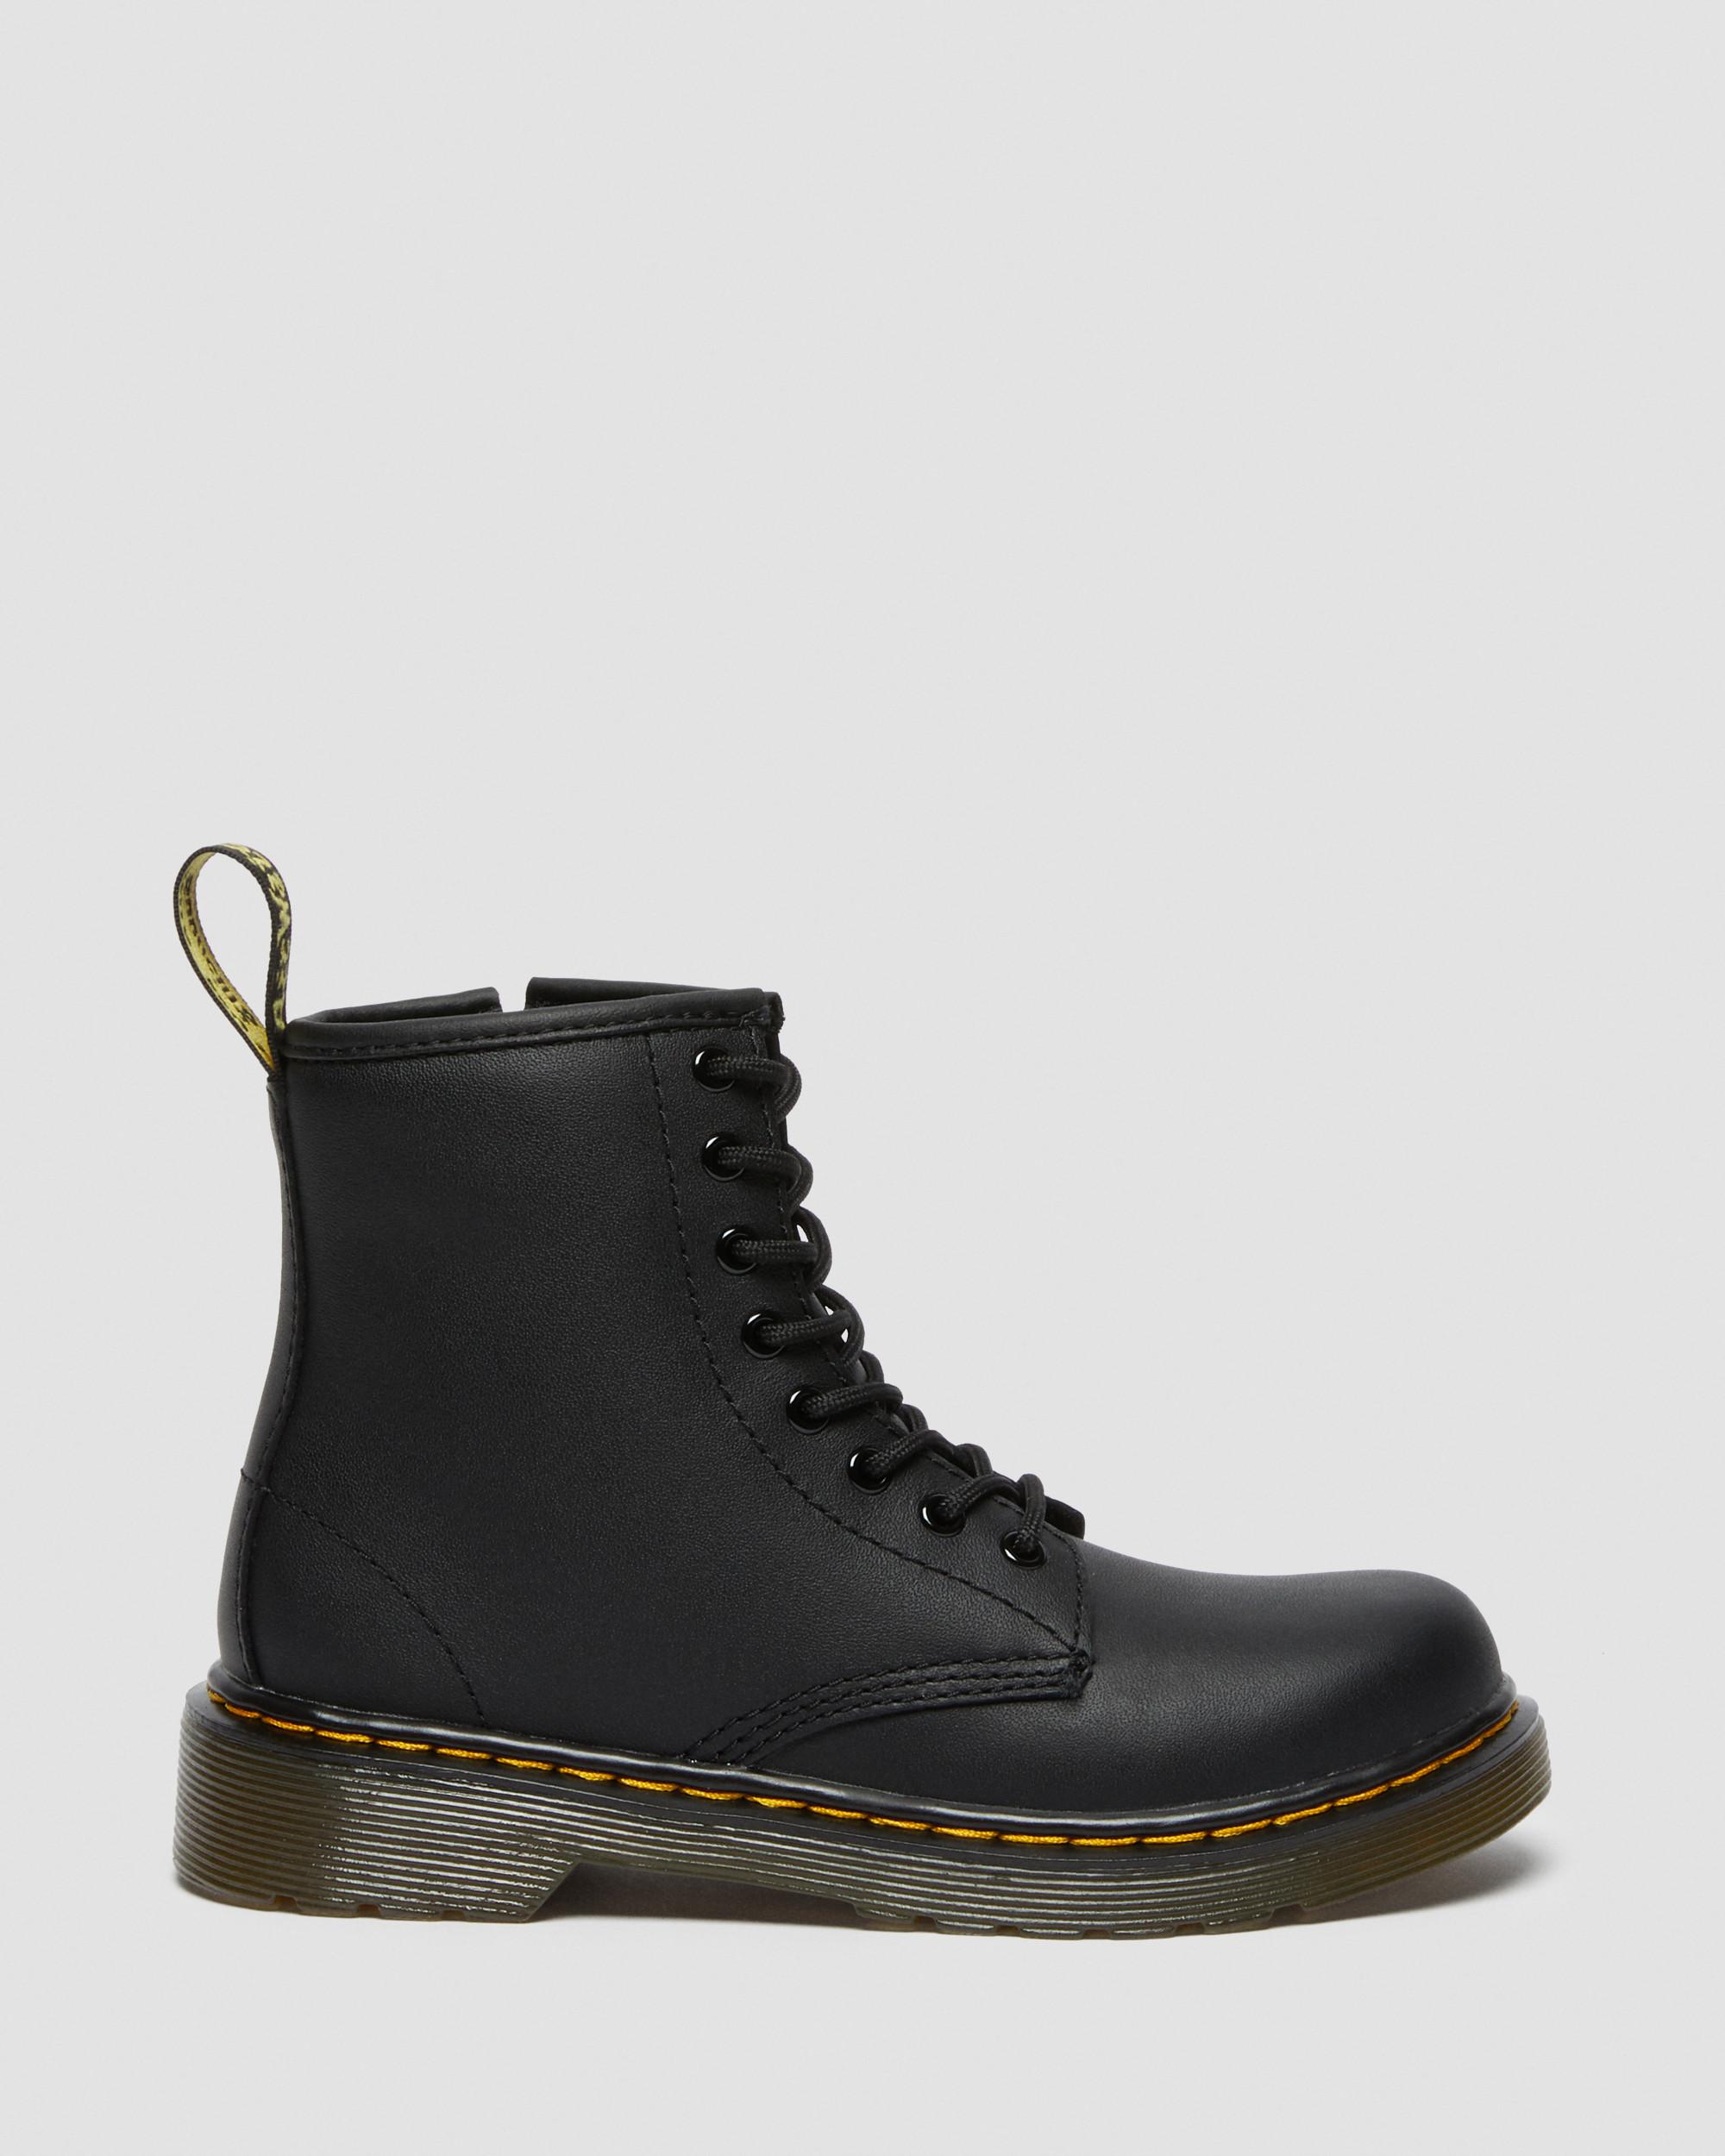 Junior Boots Lace Softy Black Dr. Up in Martens 1460 | T Leather